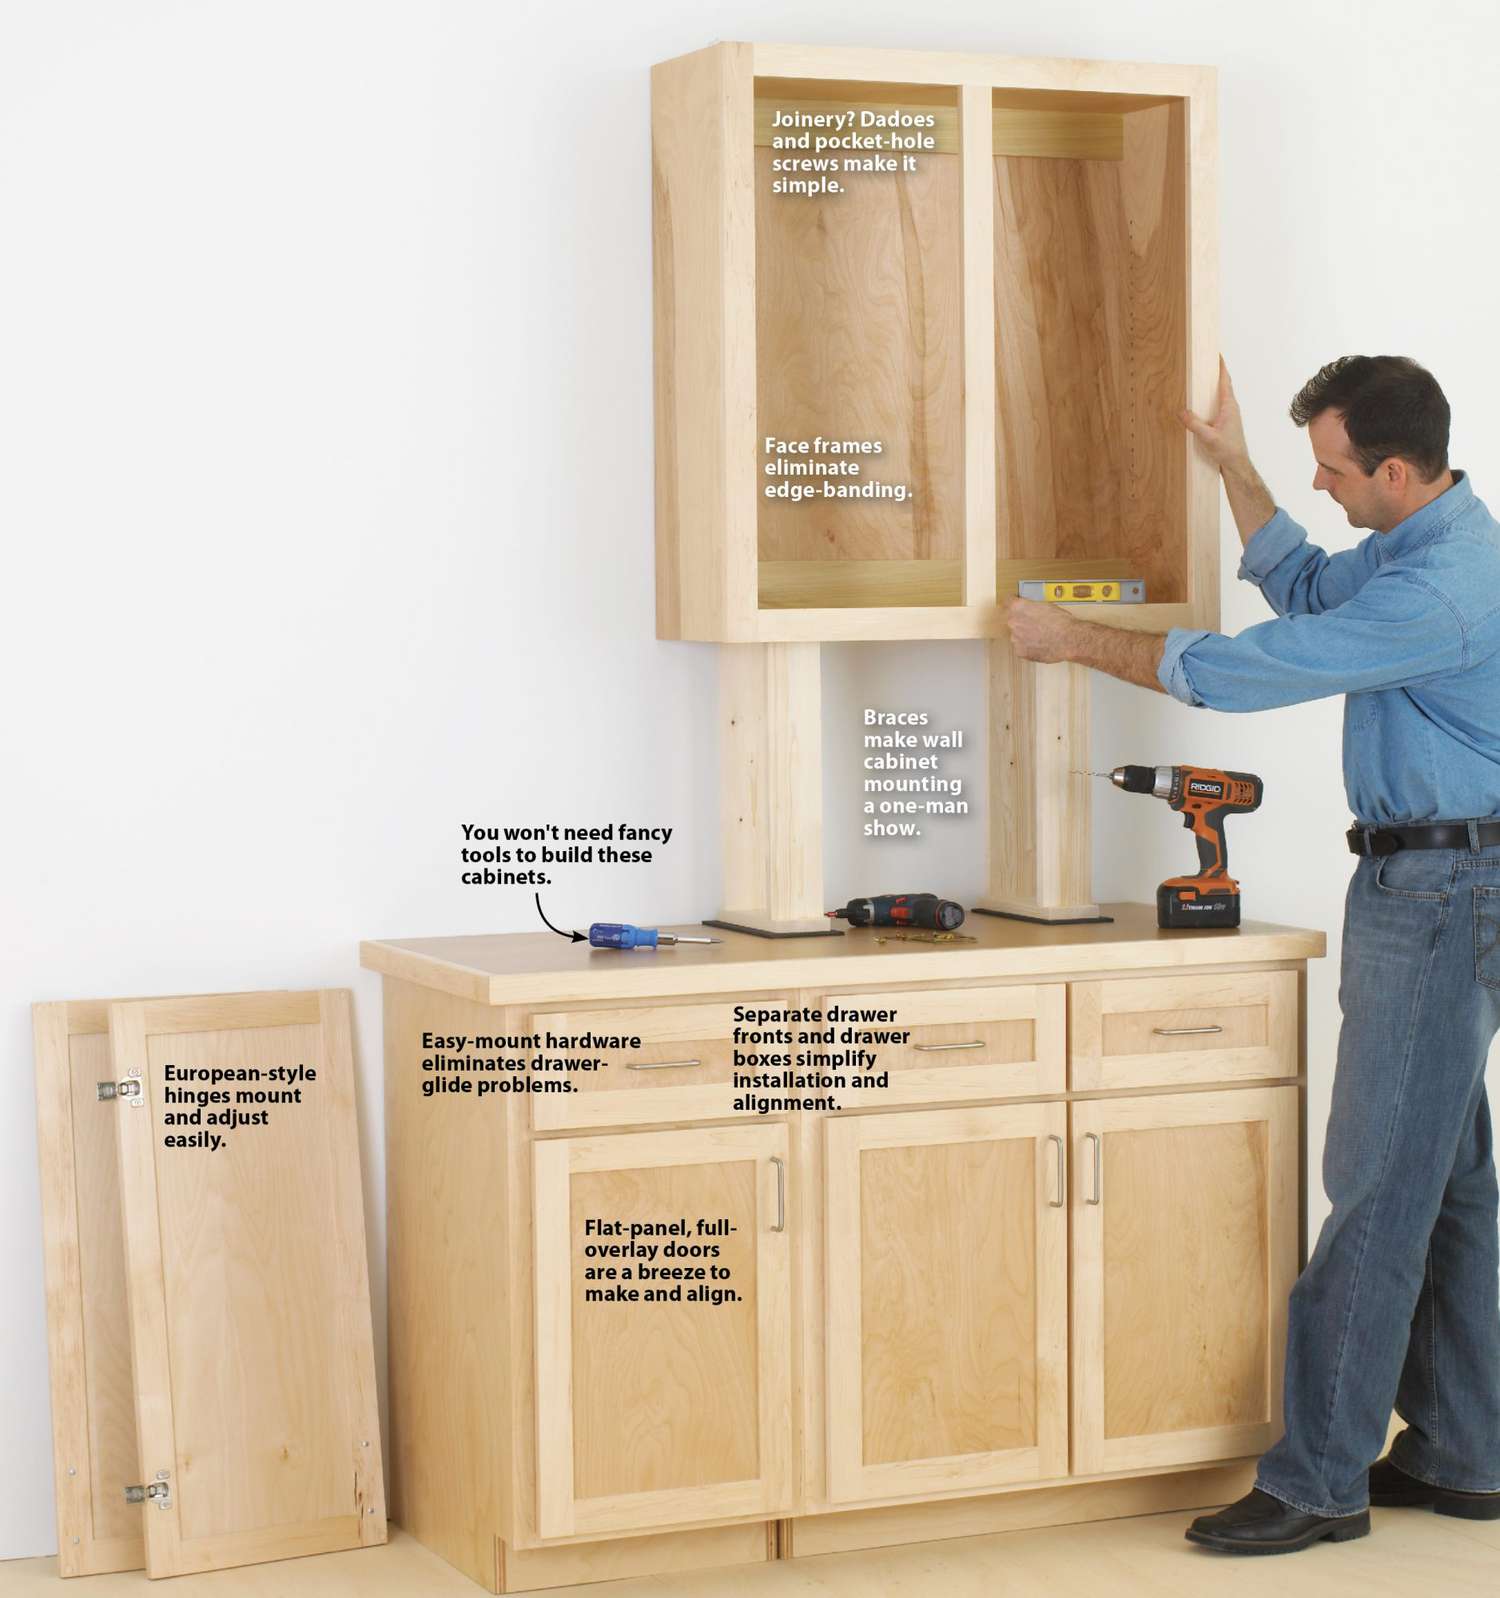 Make Cabinets The Easy Way Wood, What Tools Are Needed To Install Kitchen Cabinets